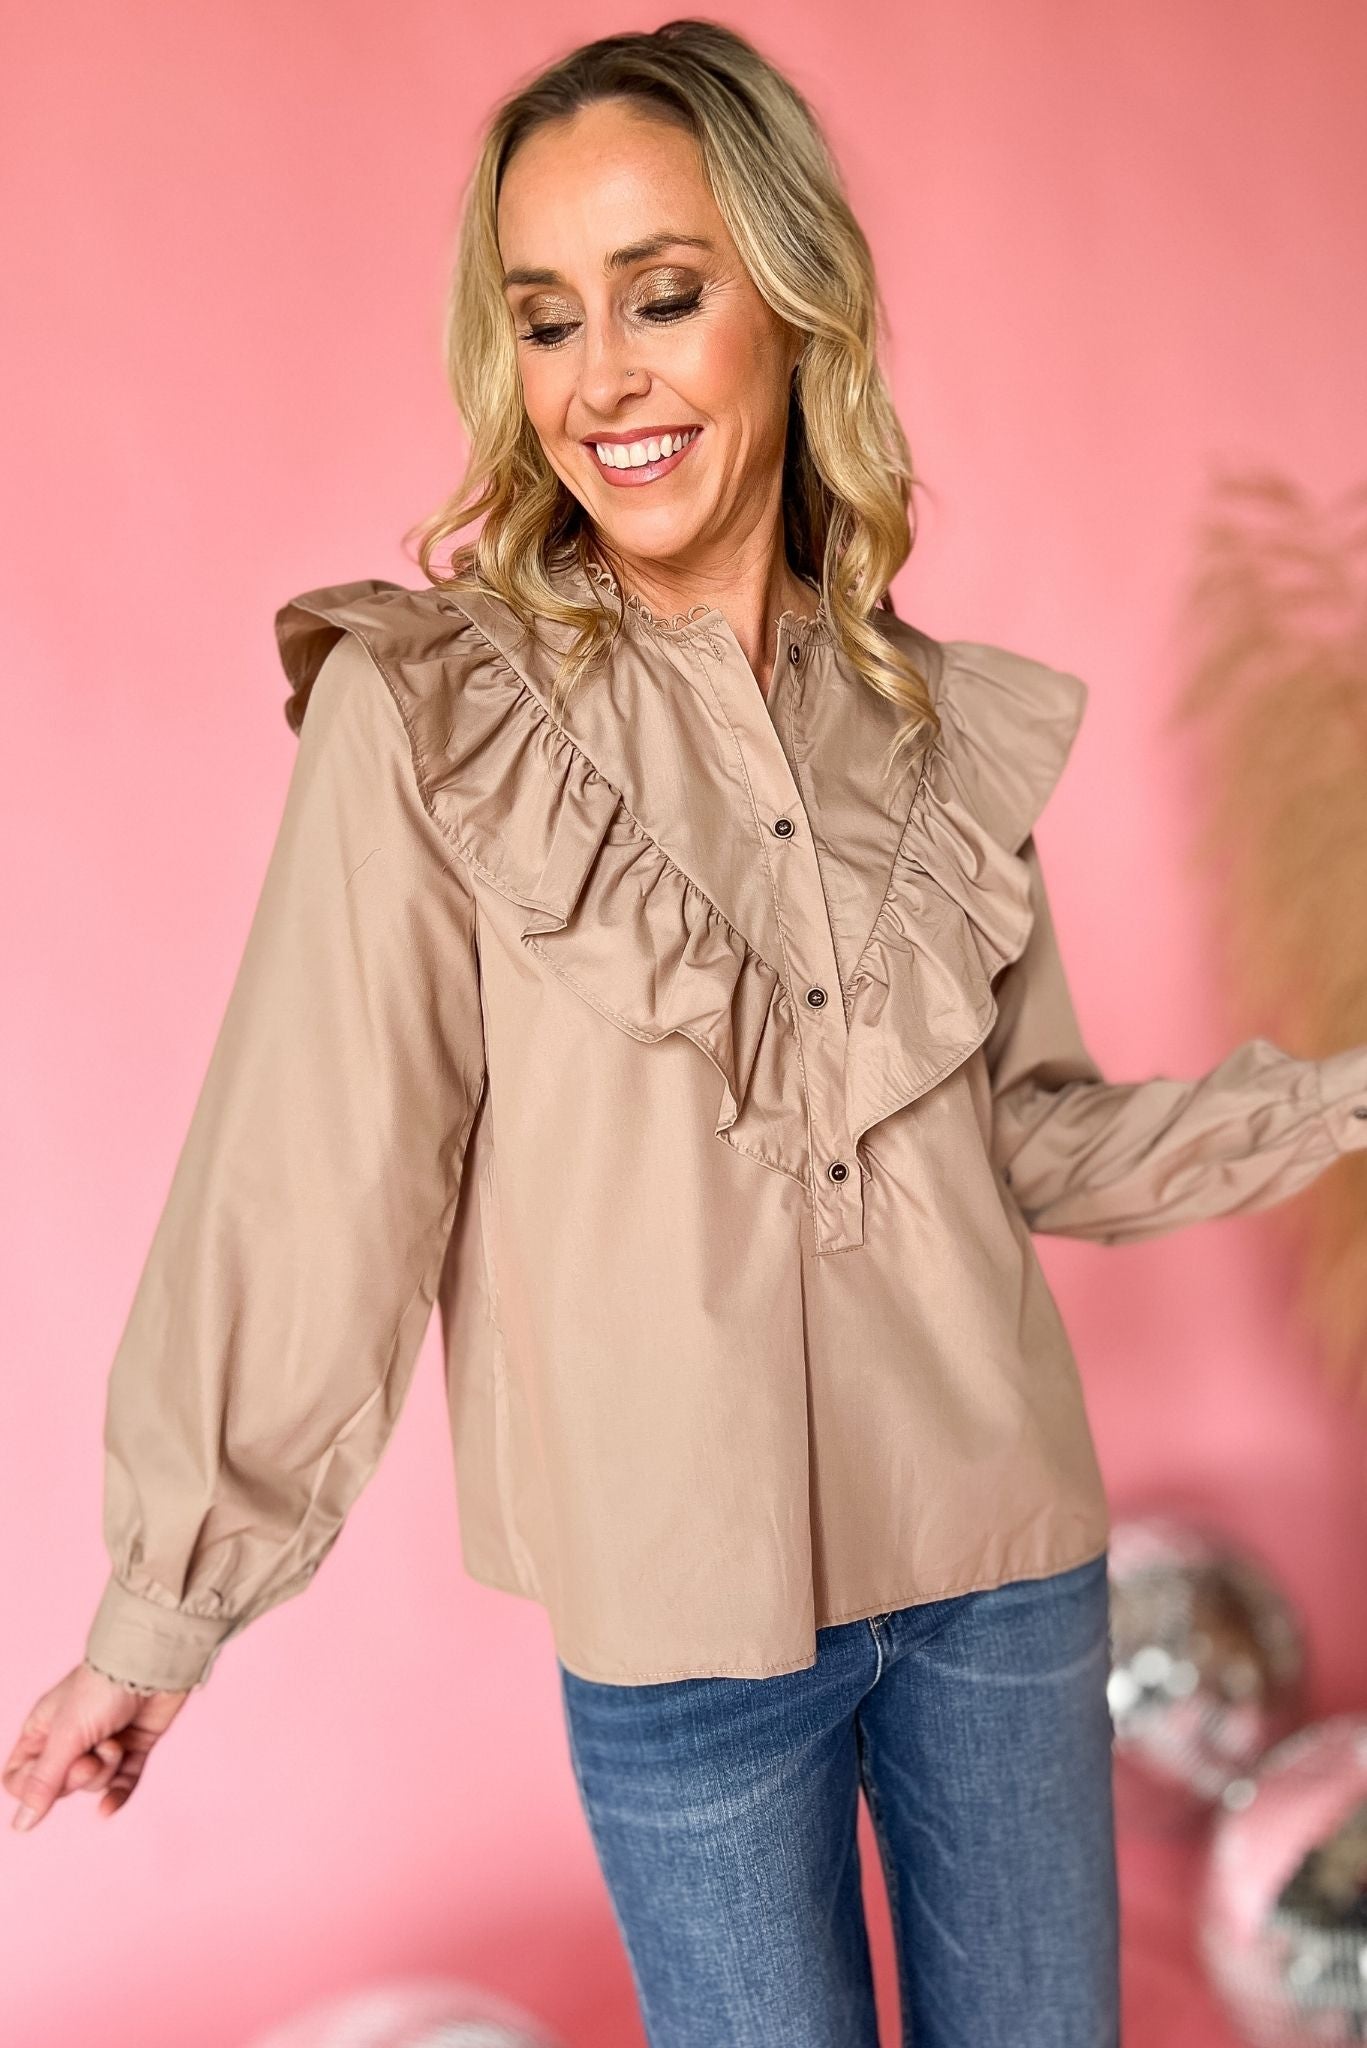 Beige Ruffle Bib Frill Neck Long Sleeve Top,spring fashion, pattern, must have, trendy, mom style, shop style your senses by mallory fitzsimmons